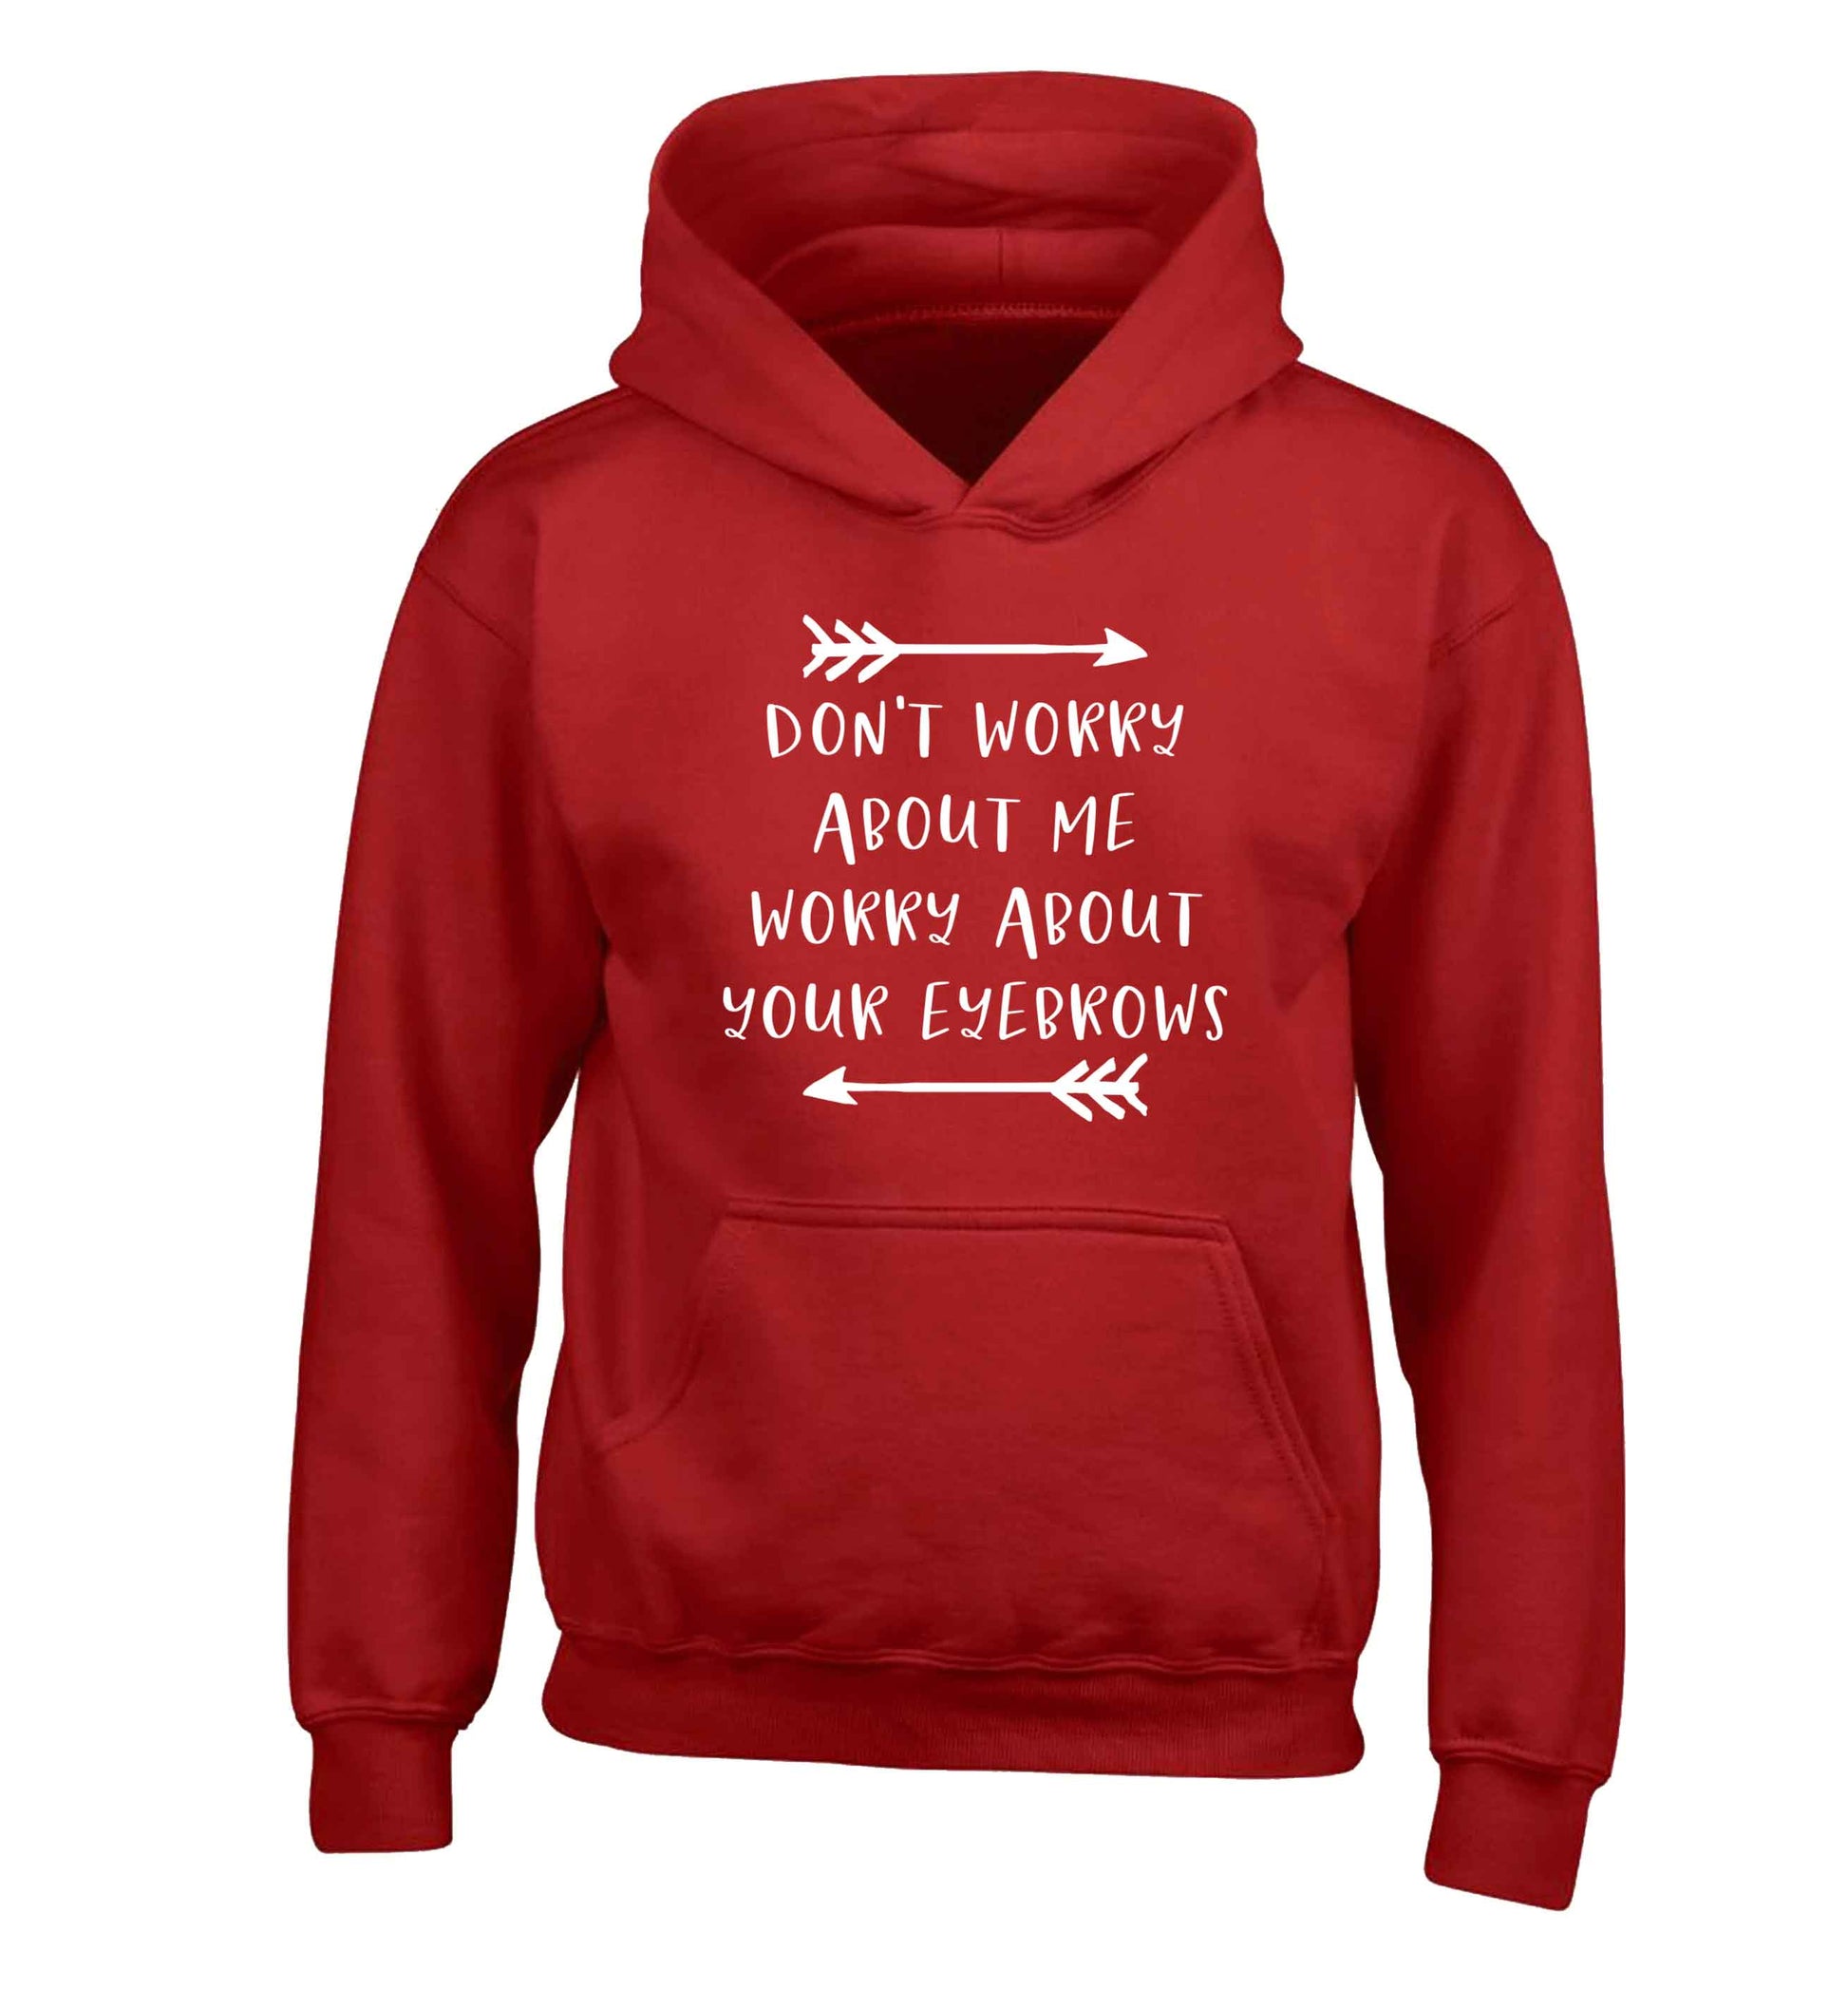 Don't worry about me worry about your eyebrows children's red hoodie 12-13 Years